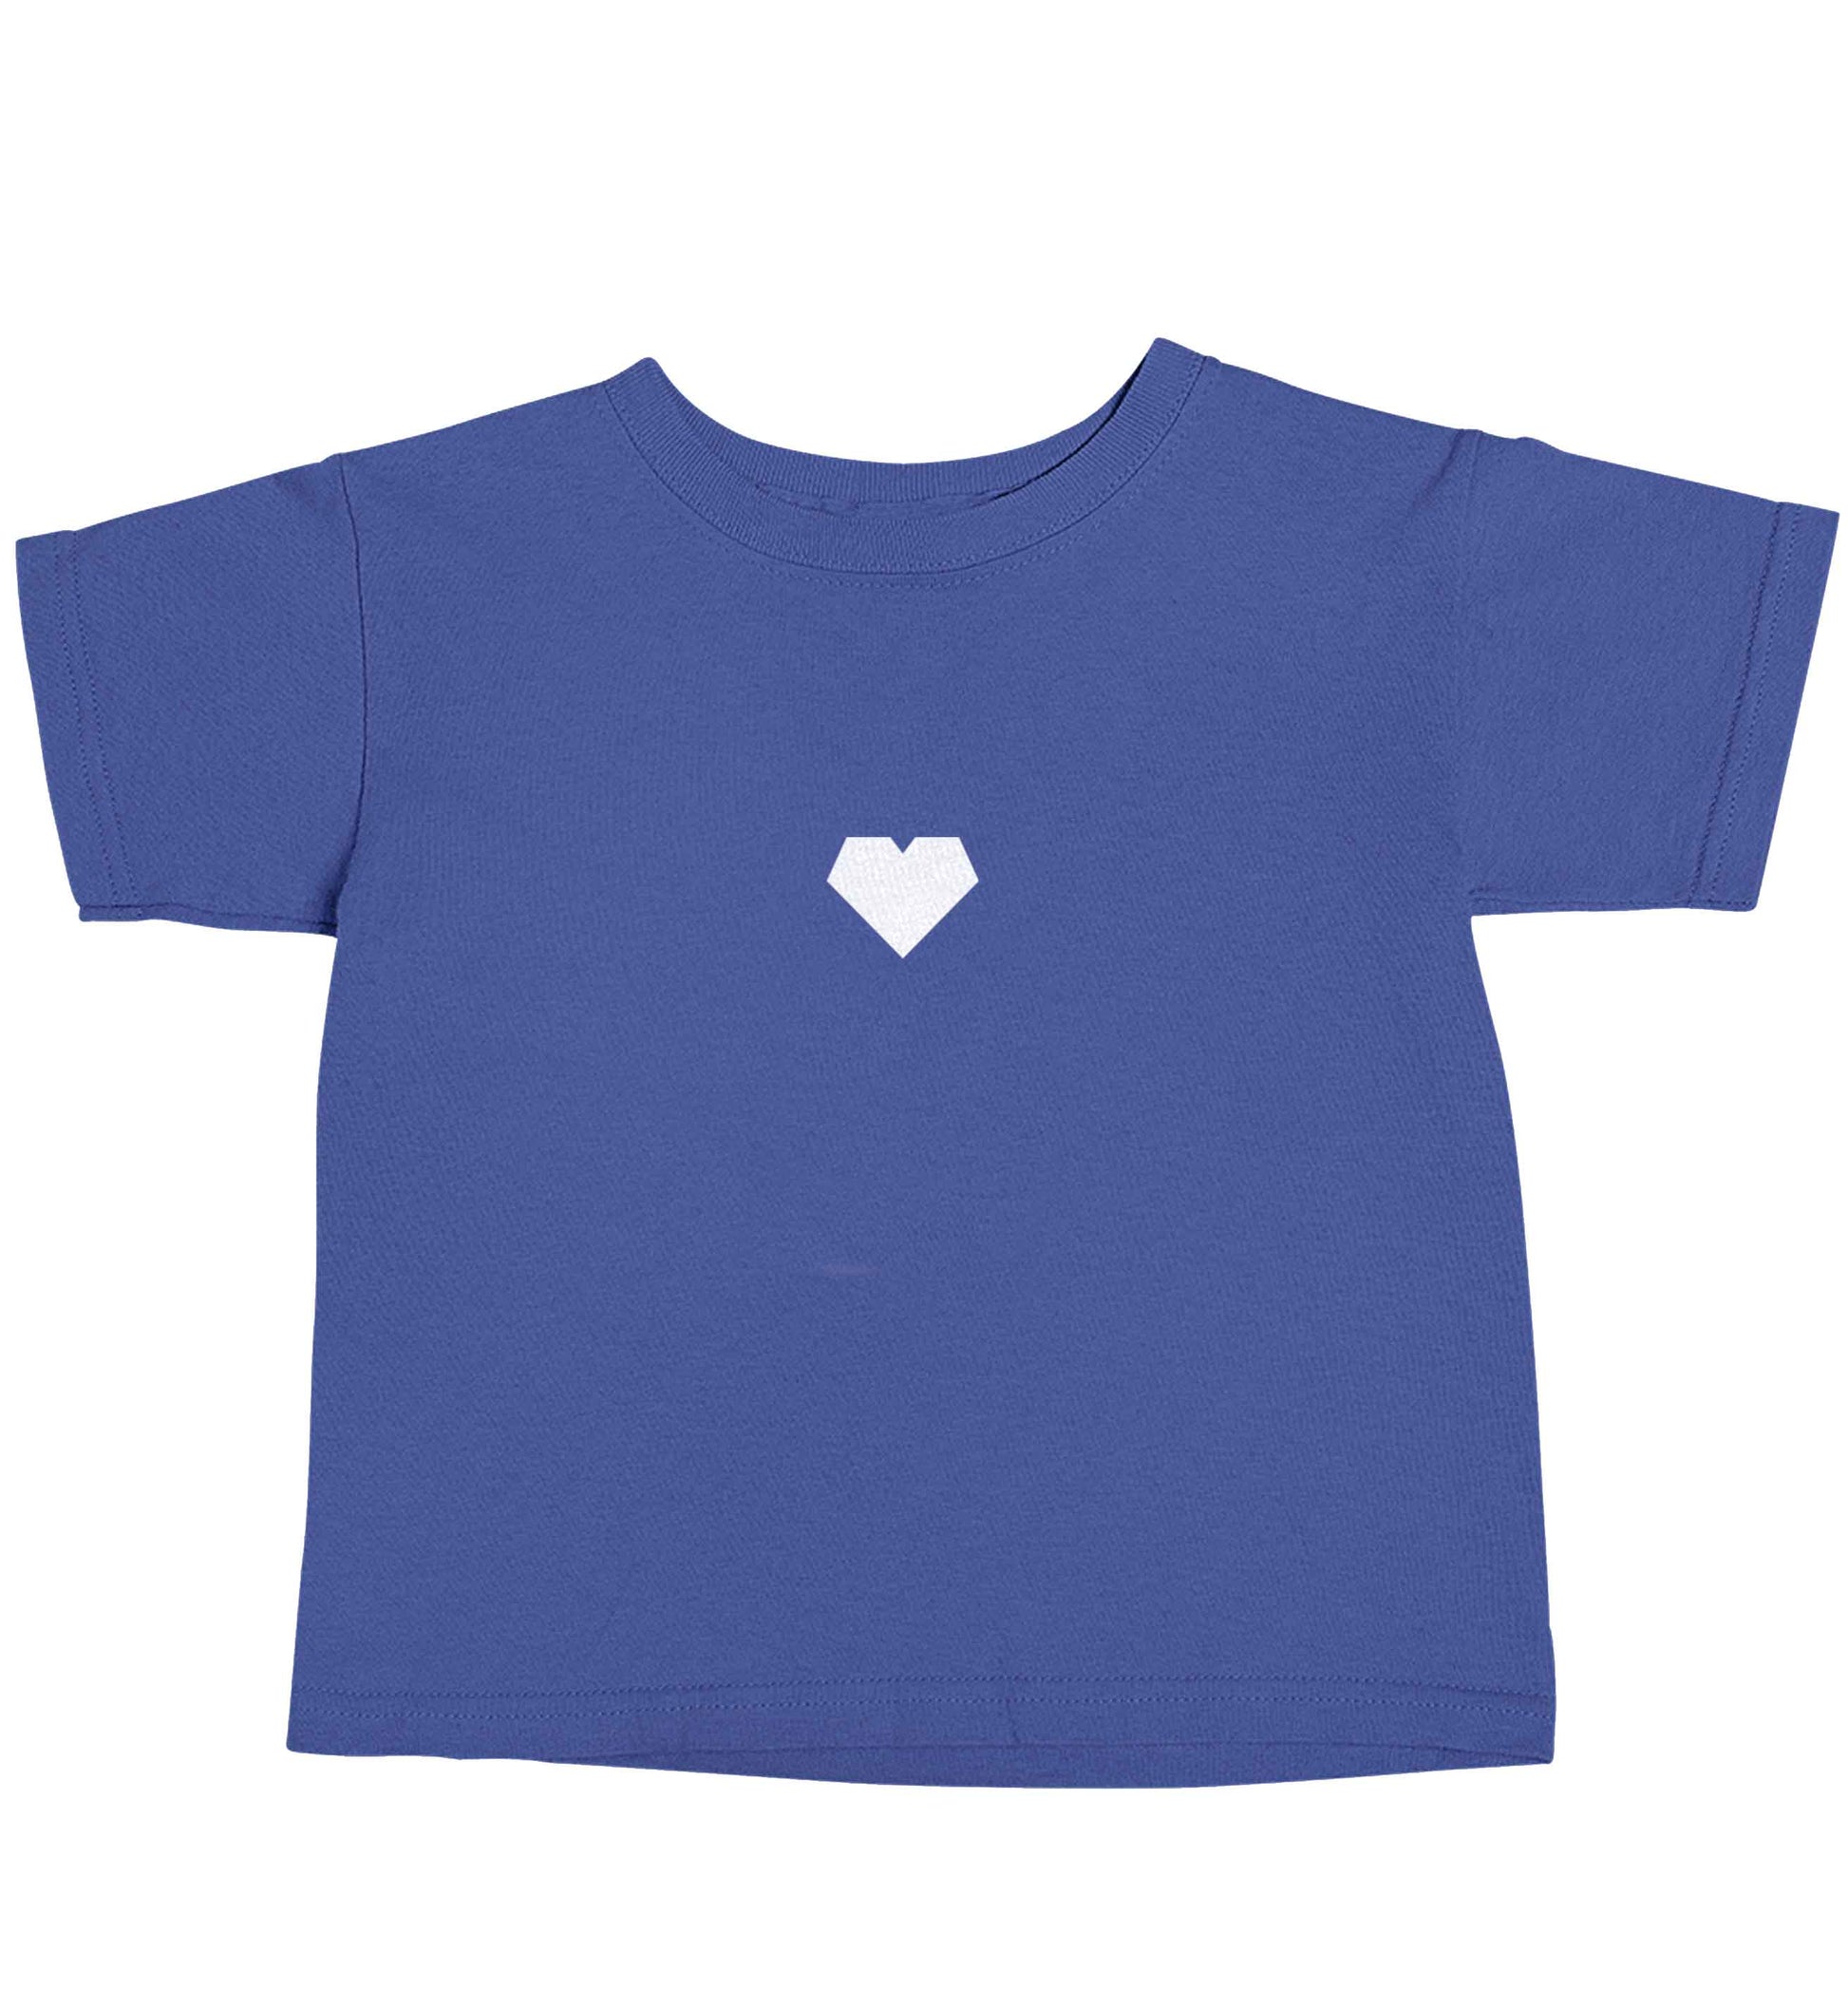 Tiny heart blue baby toddler Tshirt 2 Years